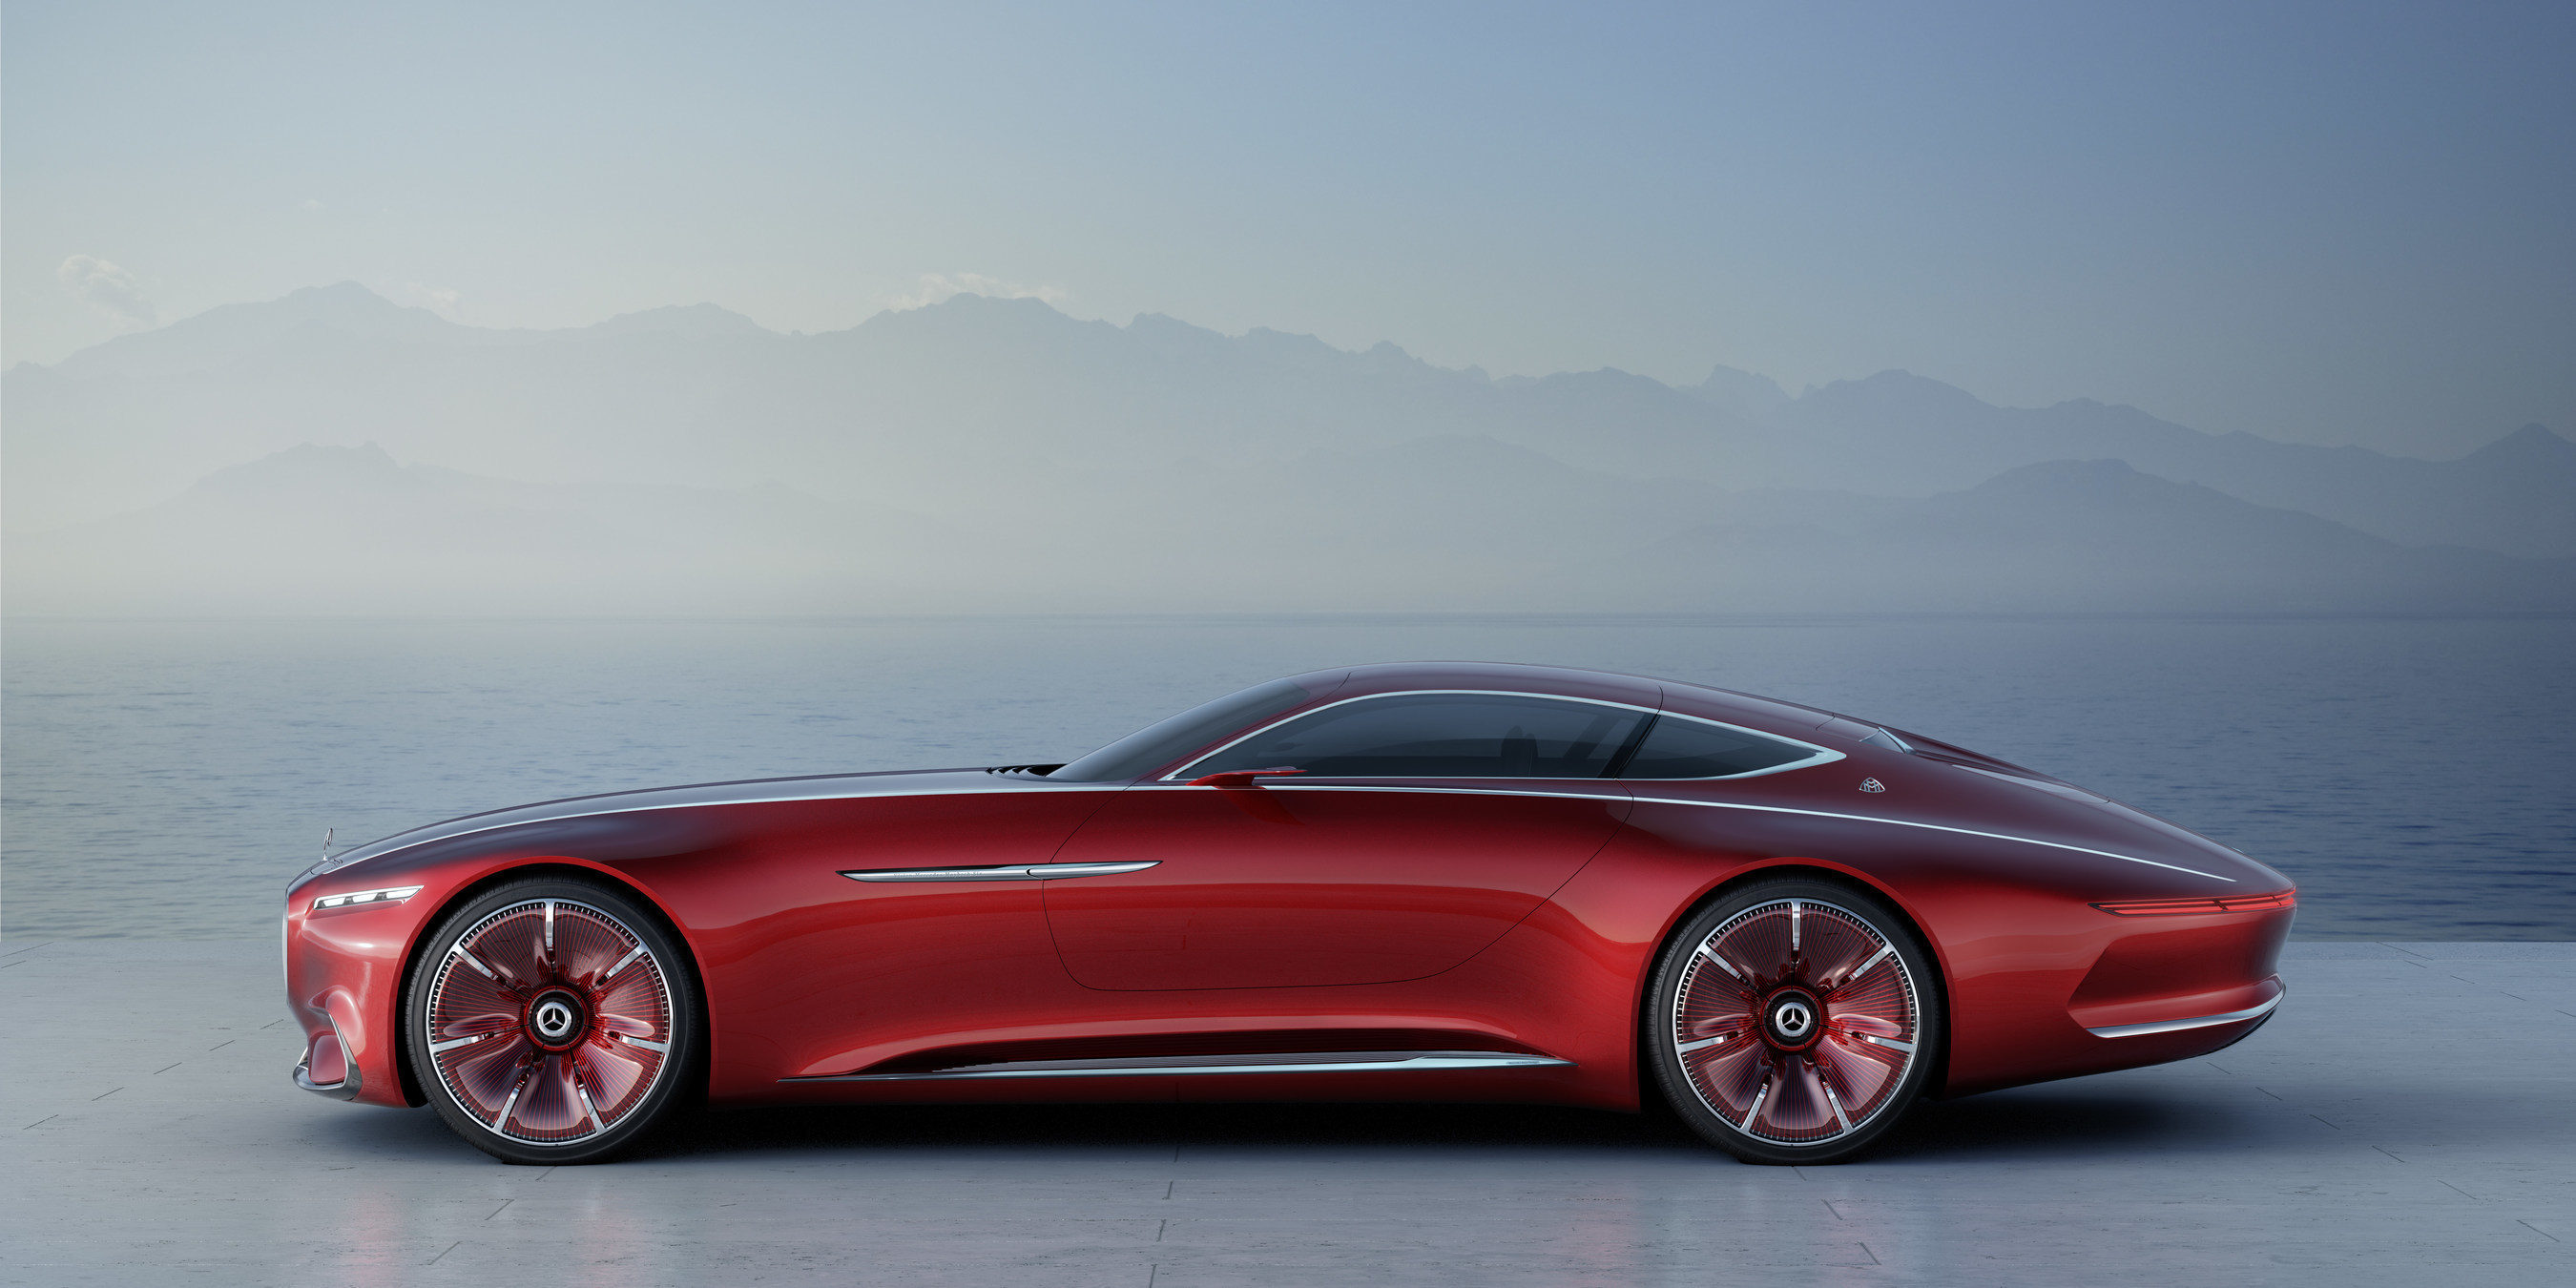 The Vision Mercedes-Maybach 6 made its world debut today in Pebble Beach, CA